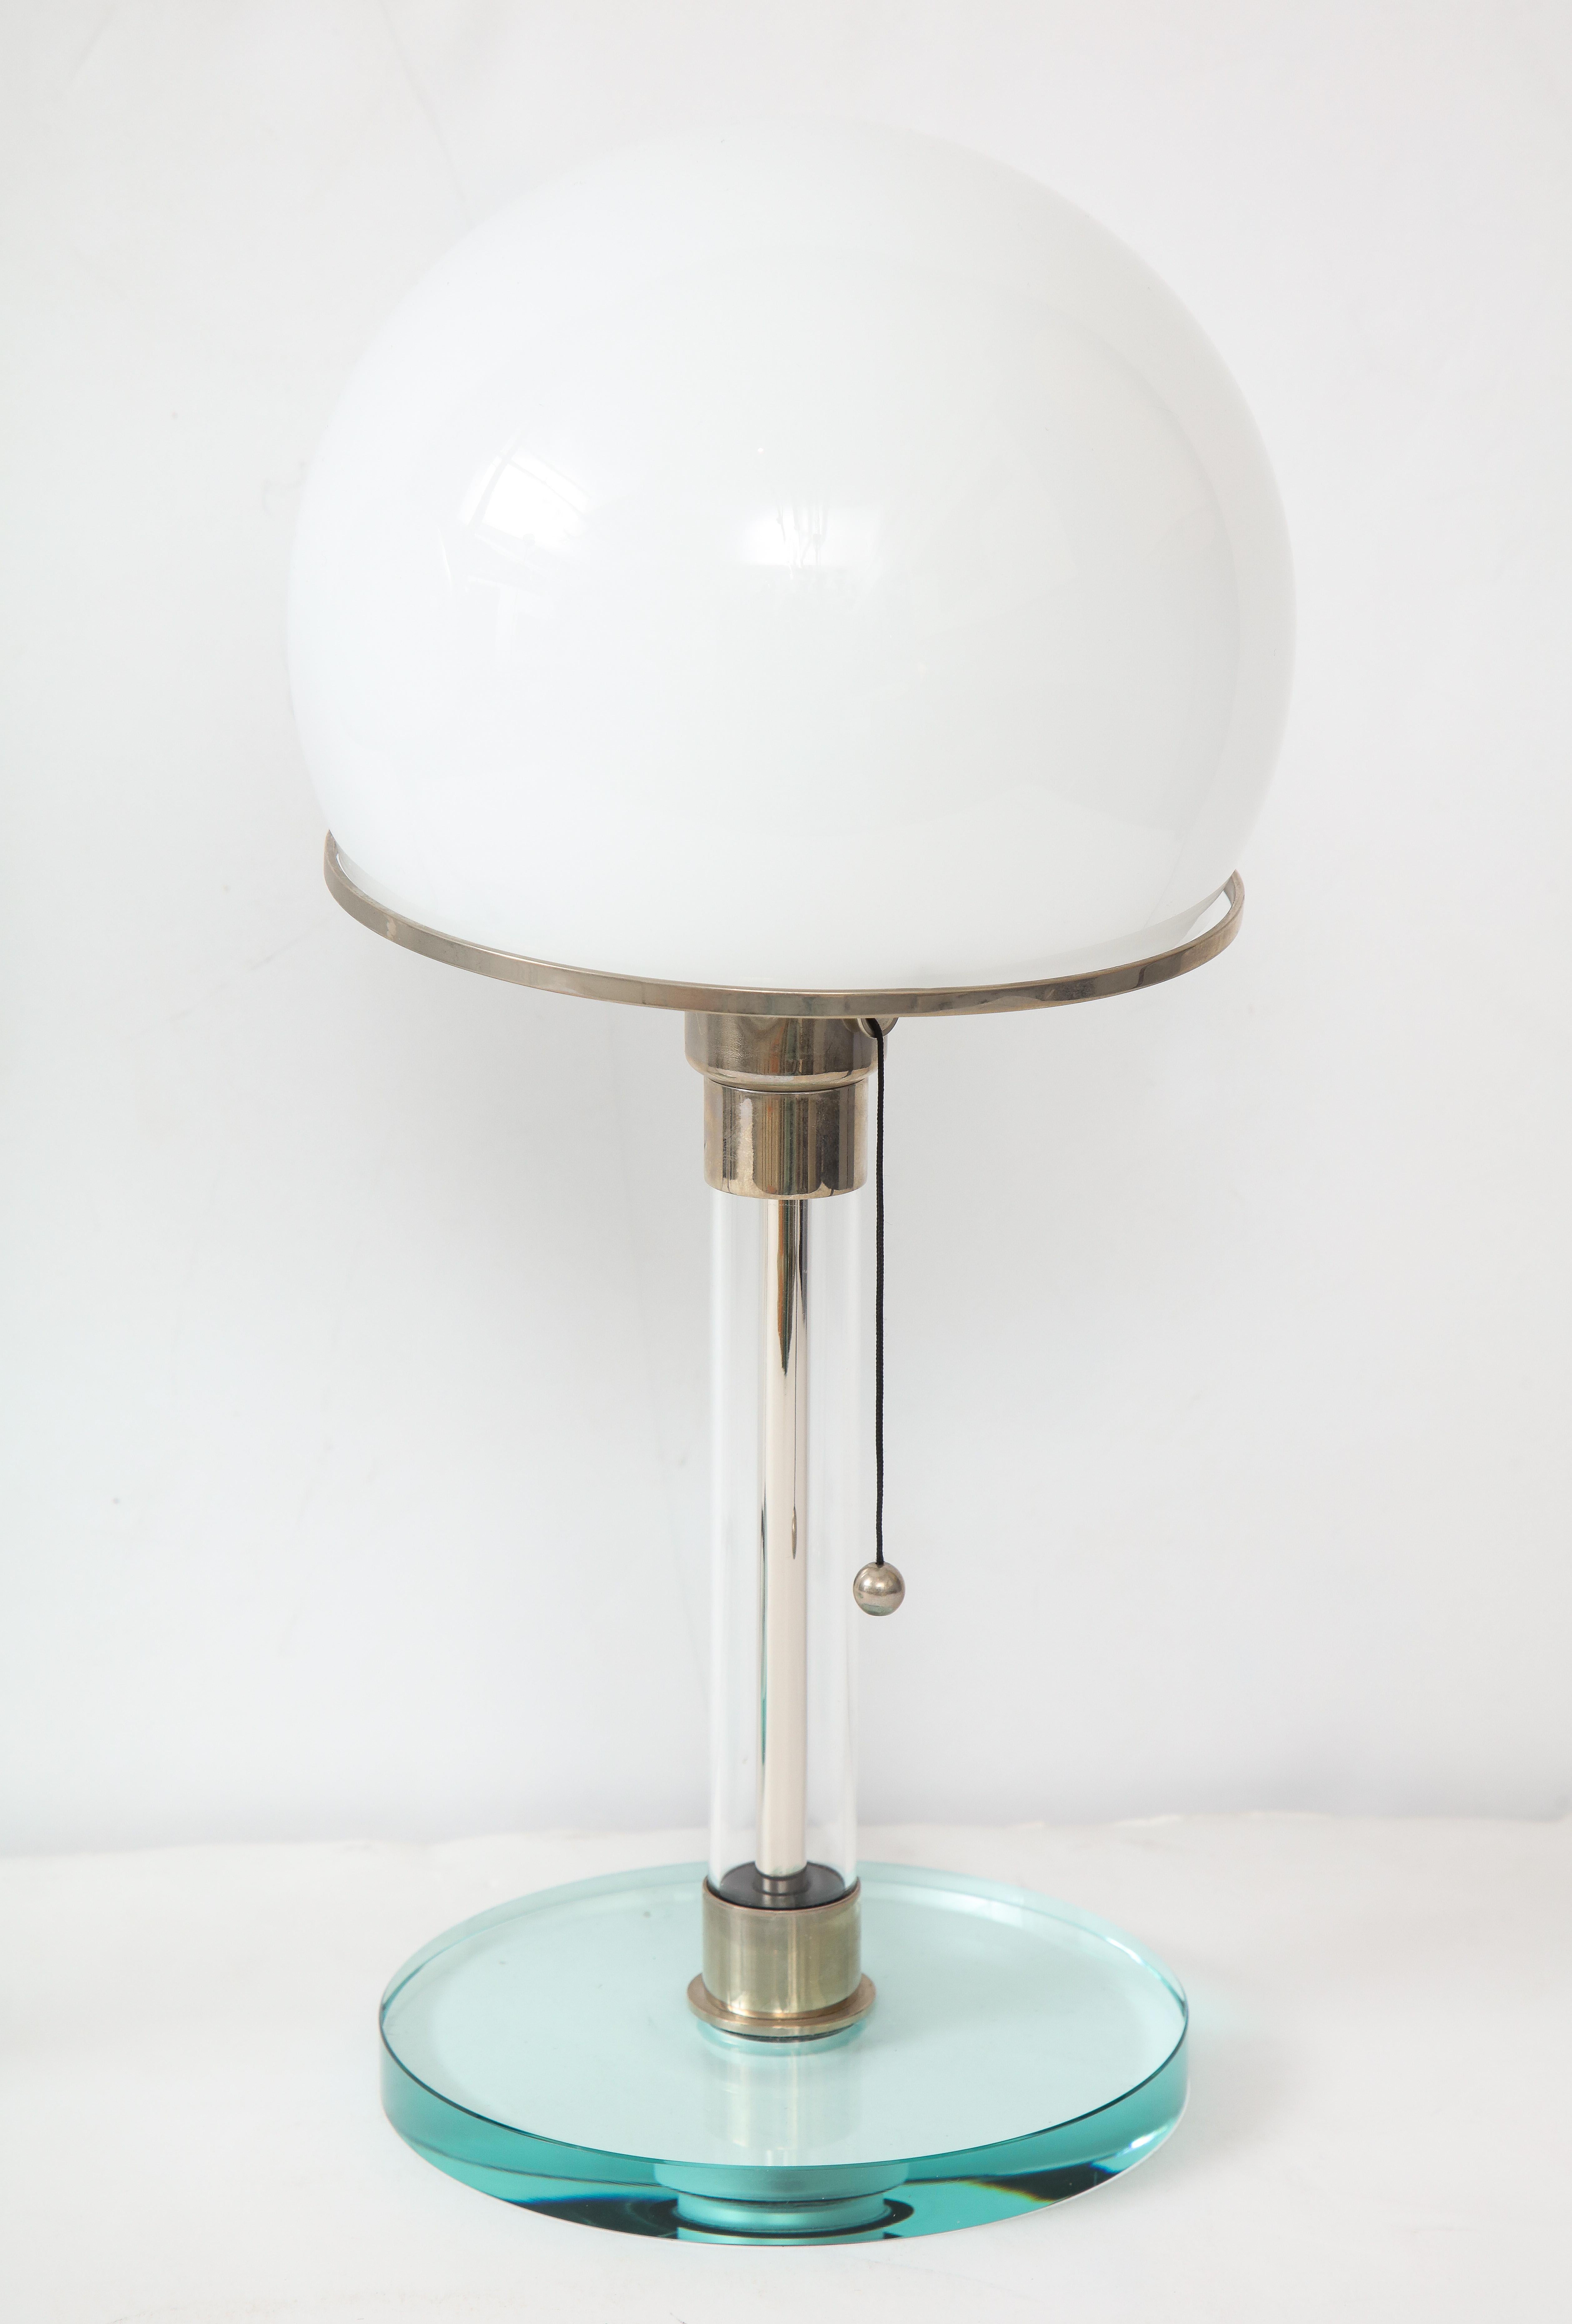 Modern Pair of Table Lamps after the Design by Wilhelm Wagenfeld